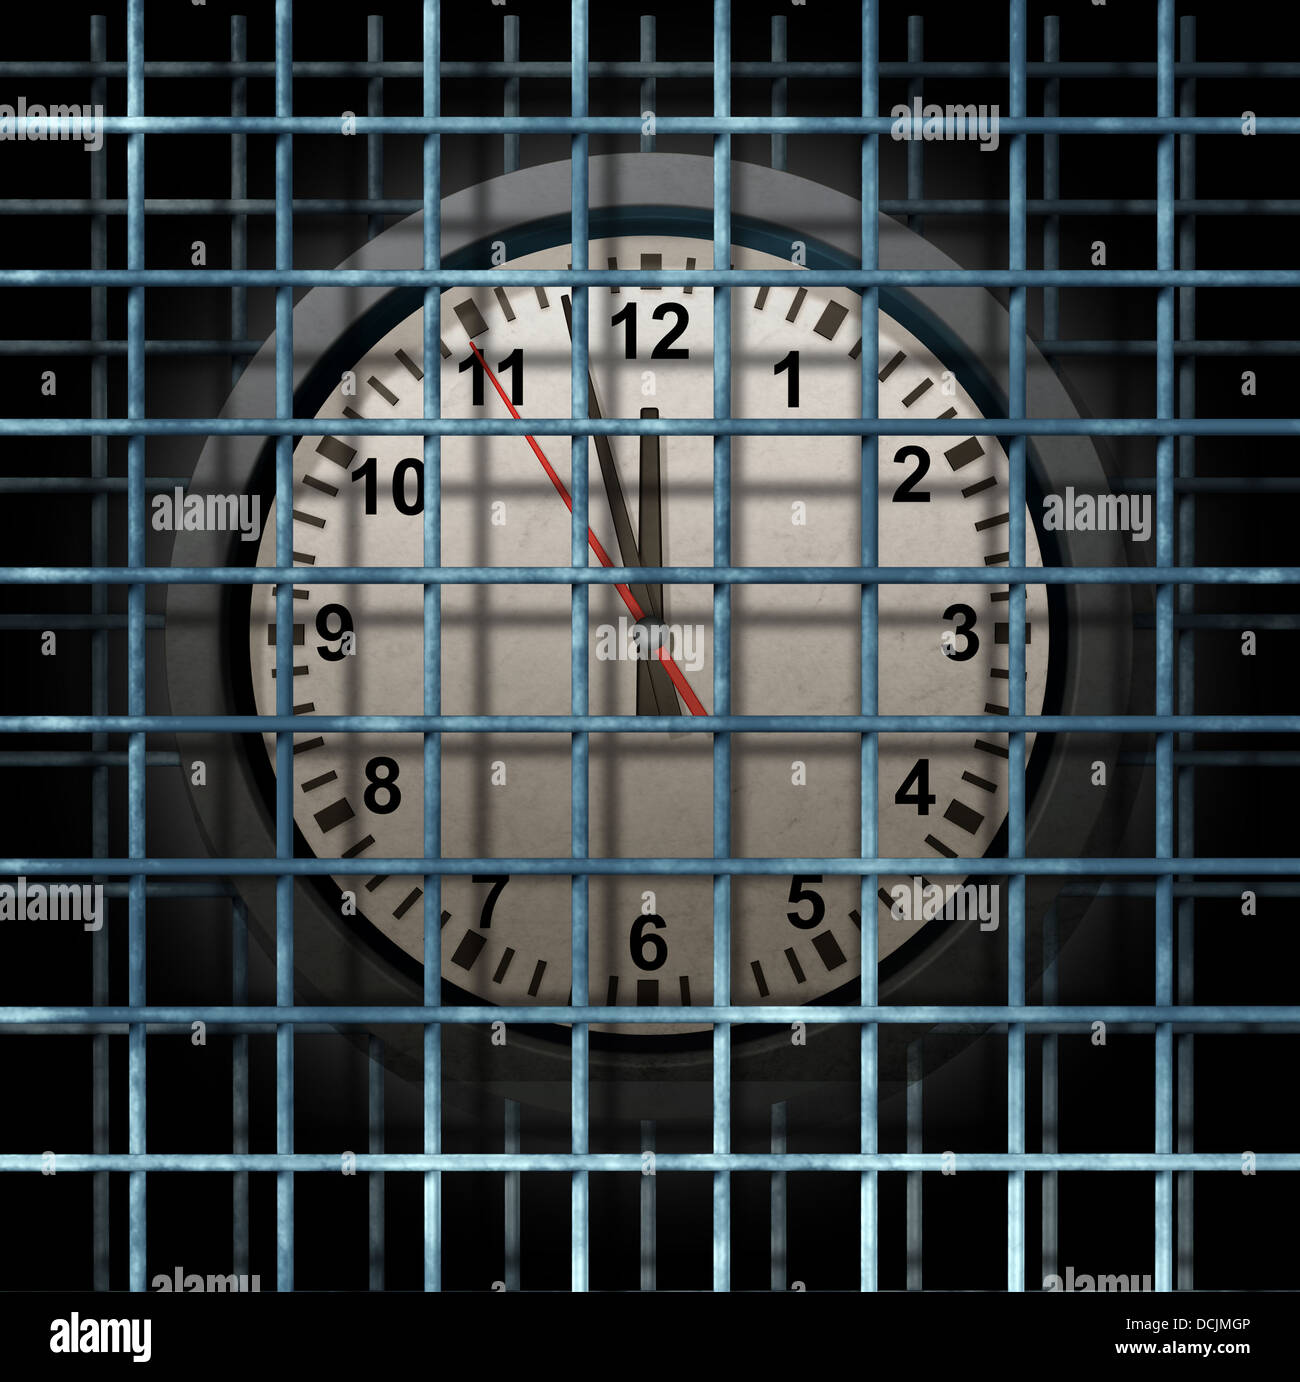 Locked schedule business concept and doing time behind bars with a time clock confined away in prison as a symbol of schedule management and locking in dates for special events during the months or years. Stock Photo